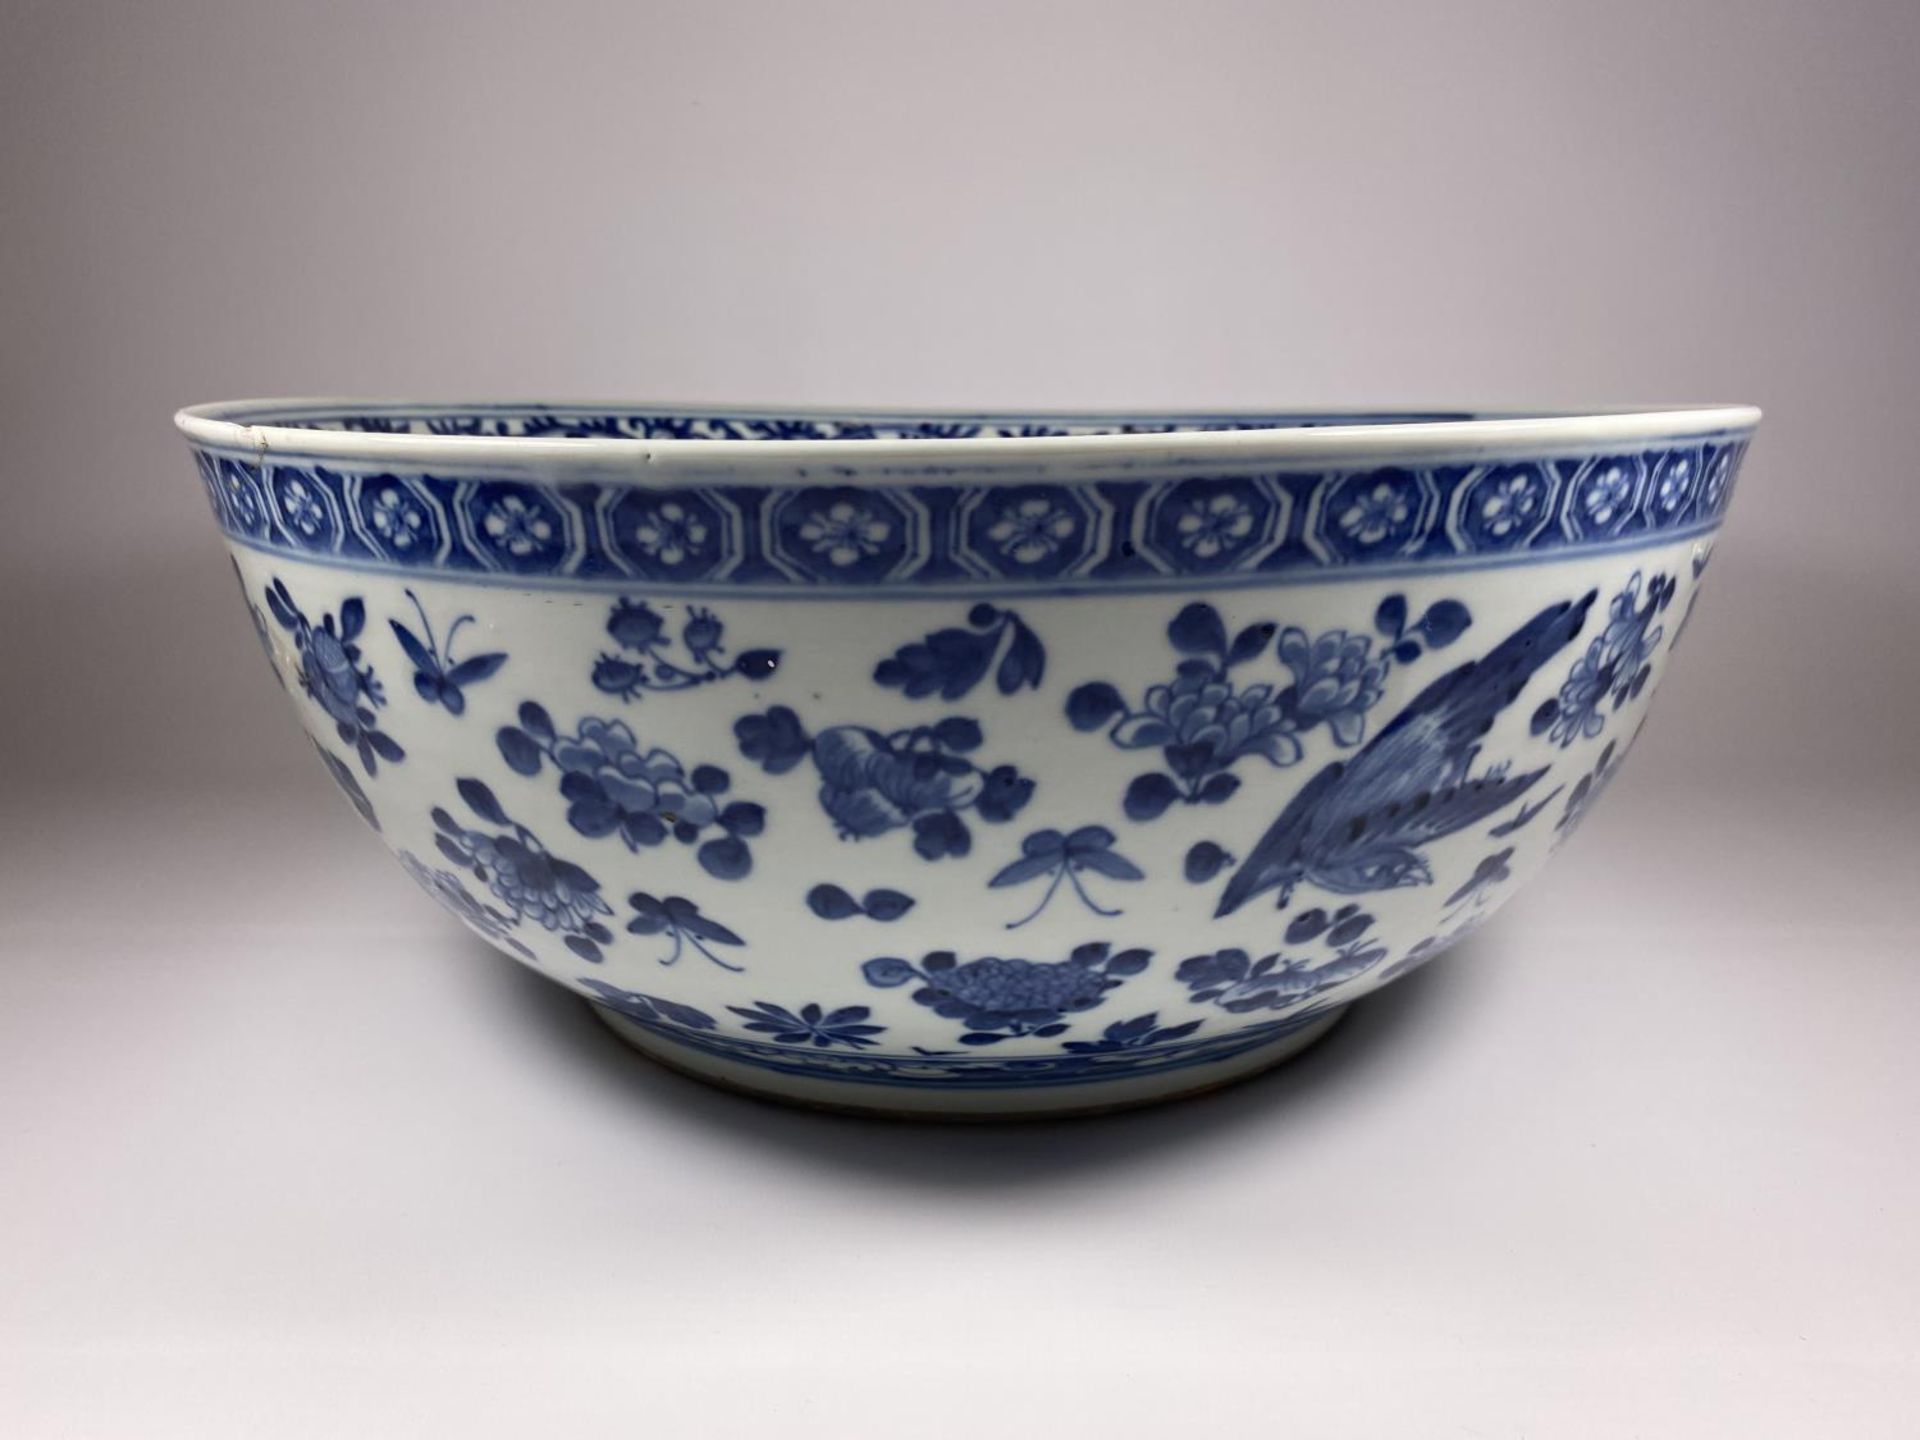 A LARGE AND IMPRESSIVE EARLY 19TH CENTURY CHINESE QING BLUE AND WHITE PORCELAIN PUNCH / FRUIT BOWL - Image 9 of 14